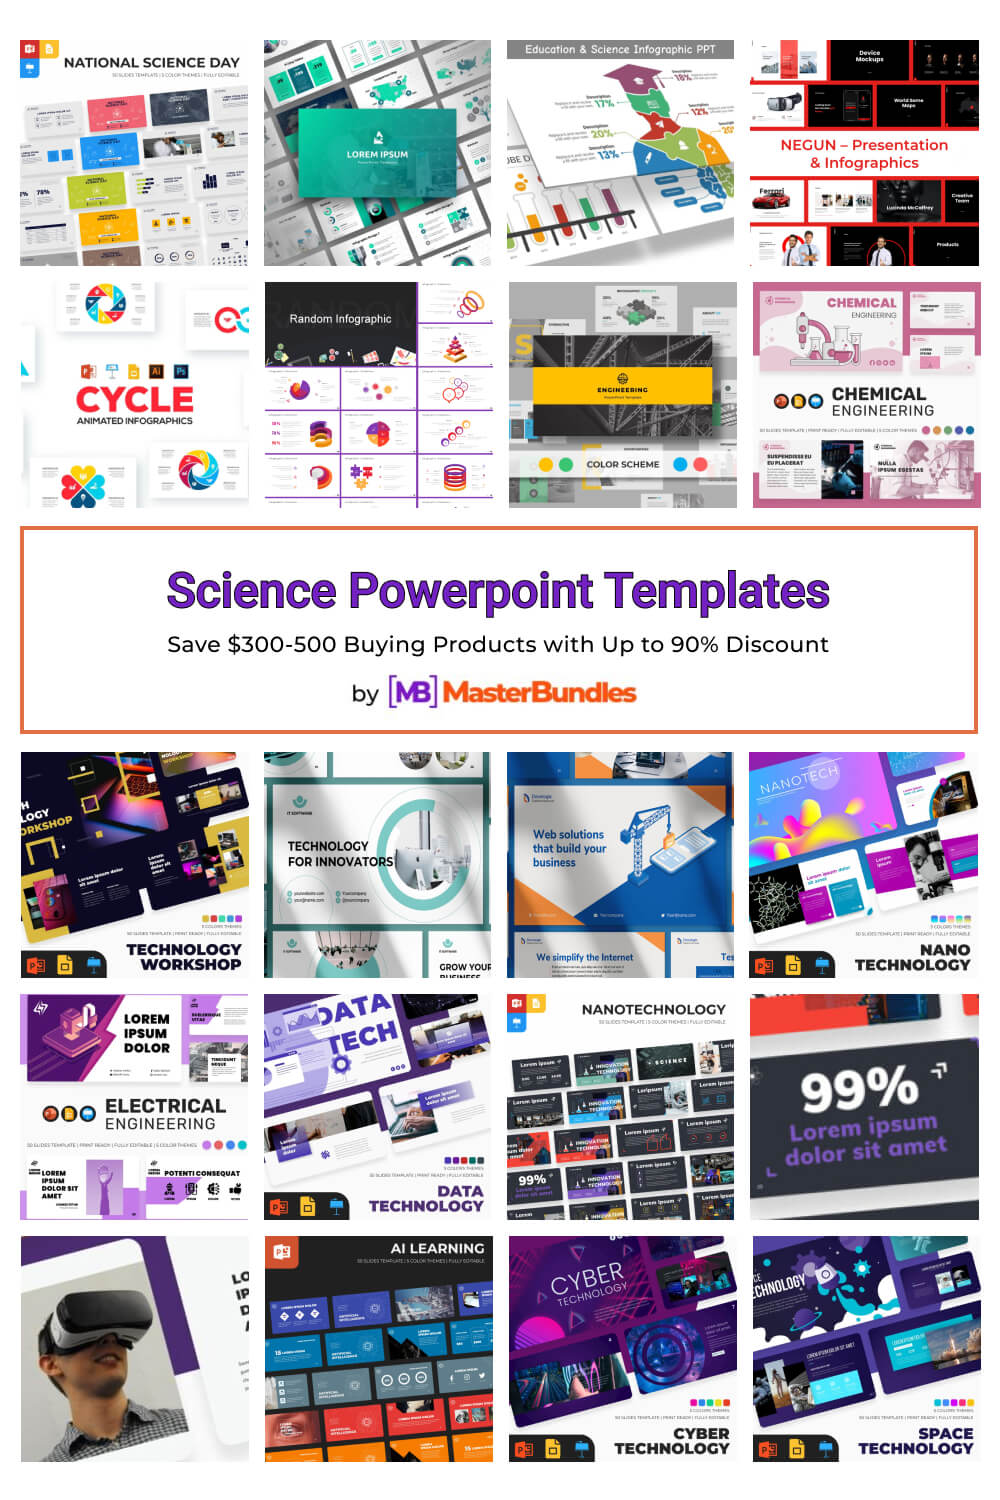 science powerpoint templates pinterest image.